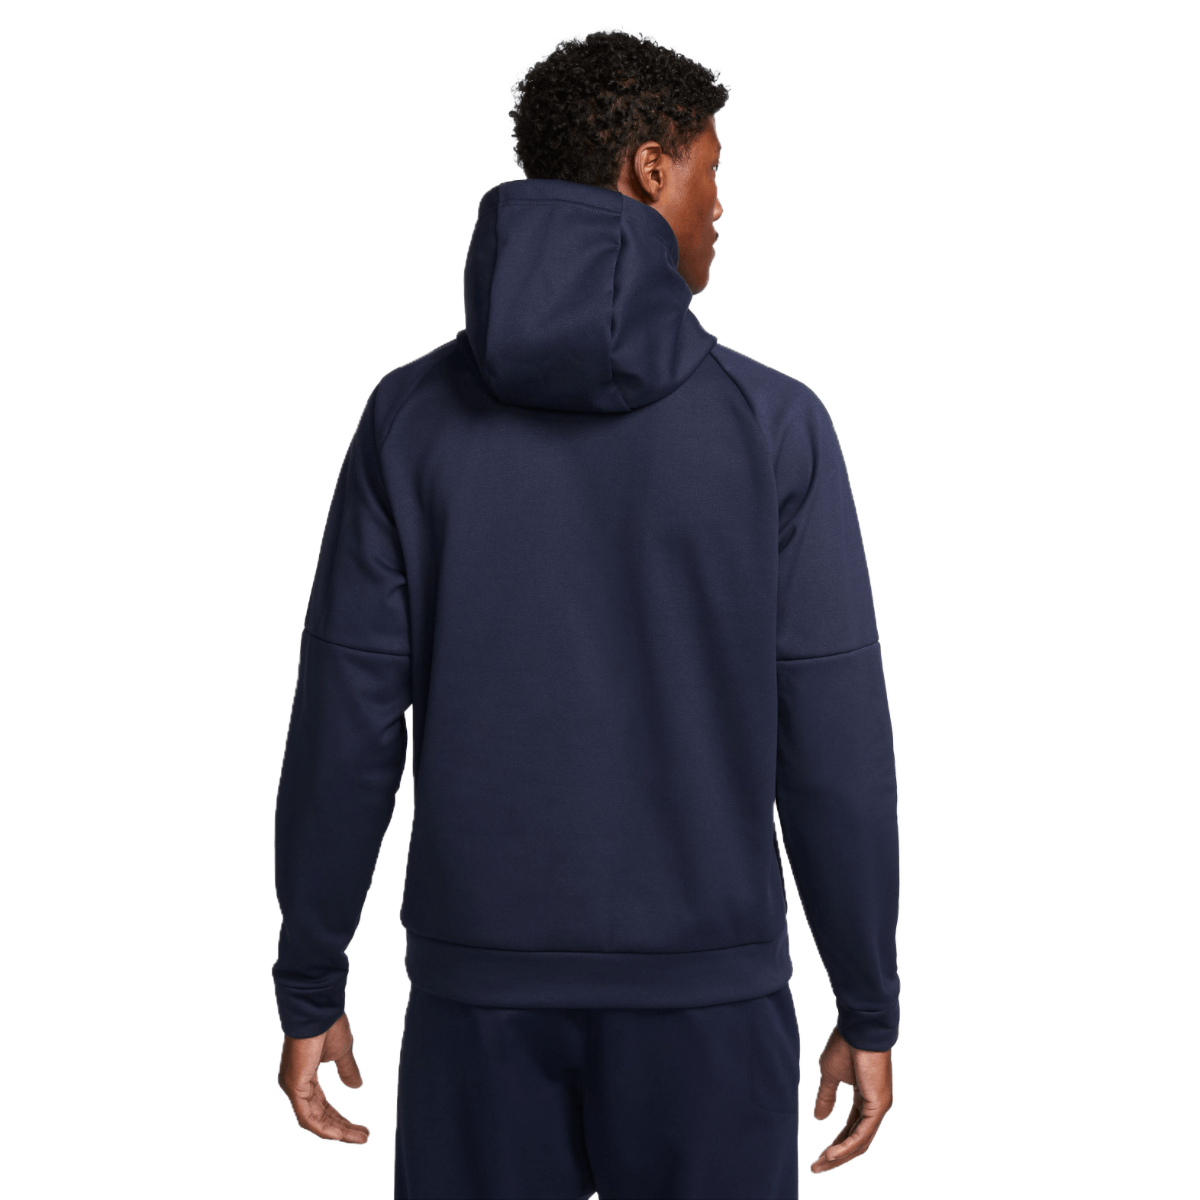 Nike Therma Men's Therma-FIT Hooded Fitness Sweatshirt